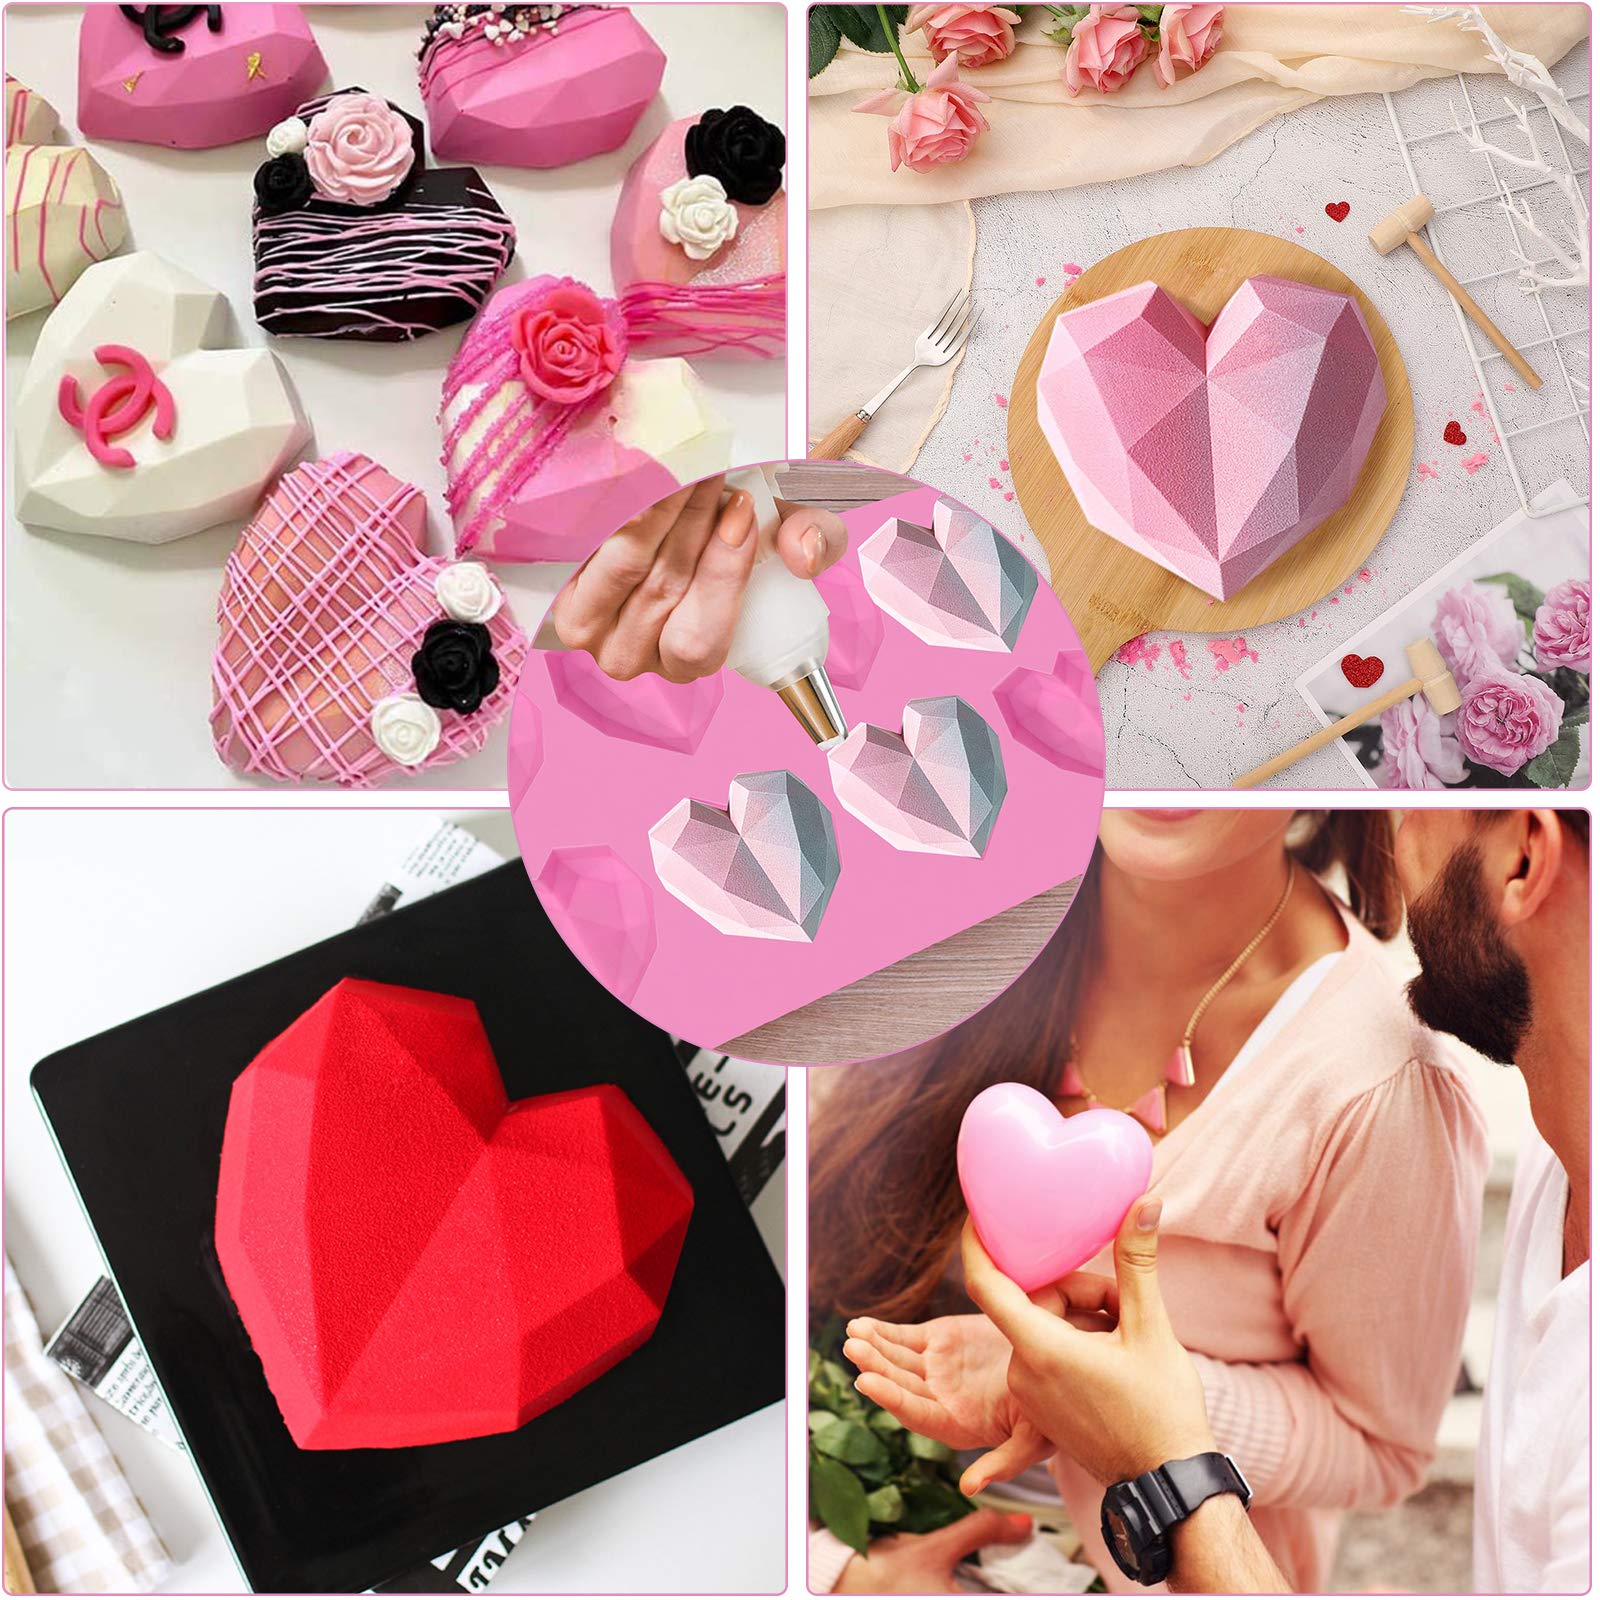 Breakable Heart Molds for Chocolate with Hammer, Heart Silicone Mold for Baking 8 Cavity Diamond Heart Shaped Mold, 8.8